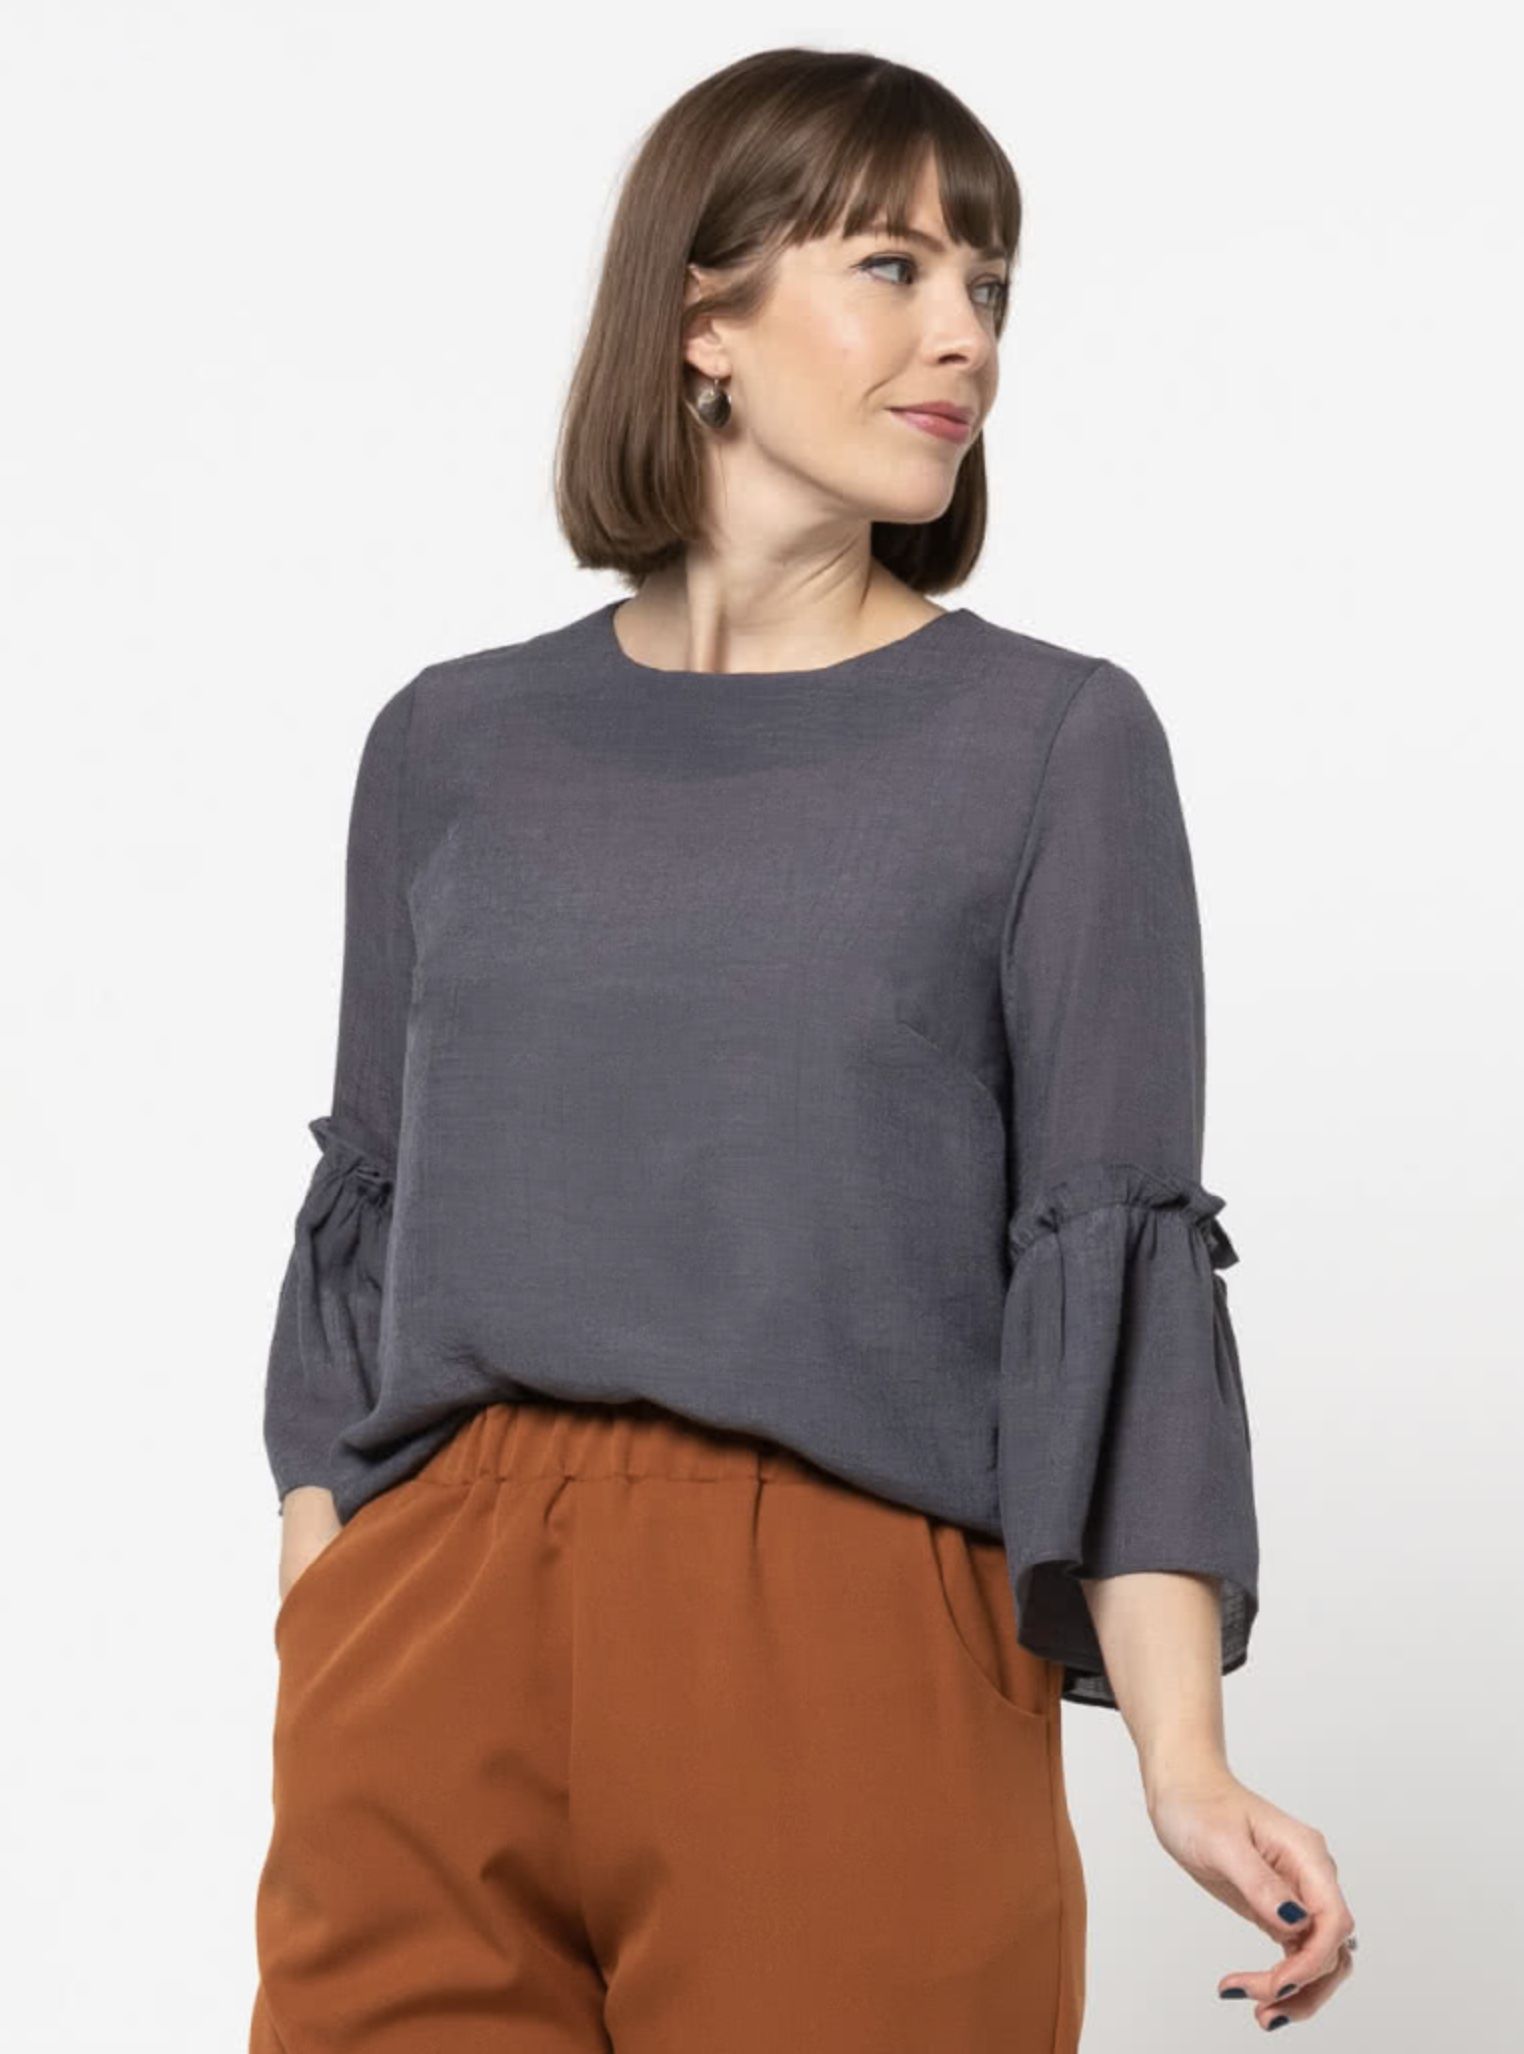 Style Arc Effie Woven Top - The Fold Line